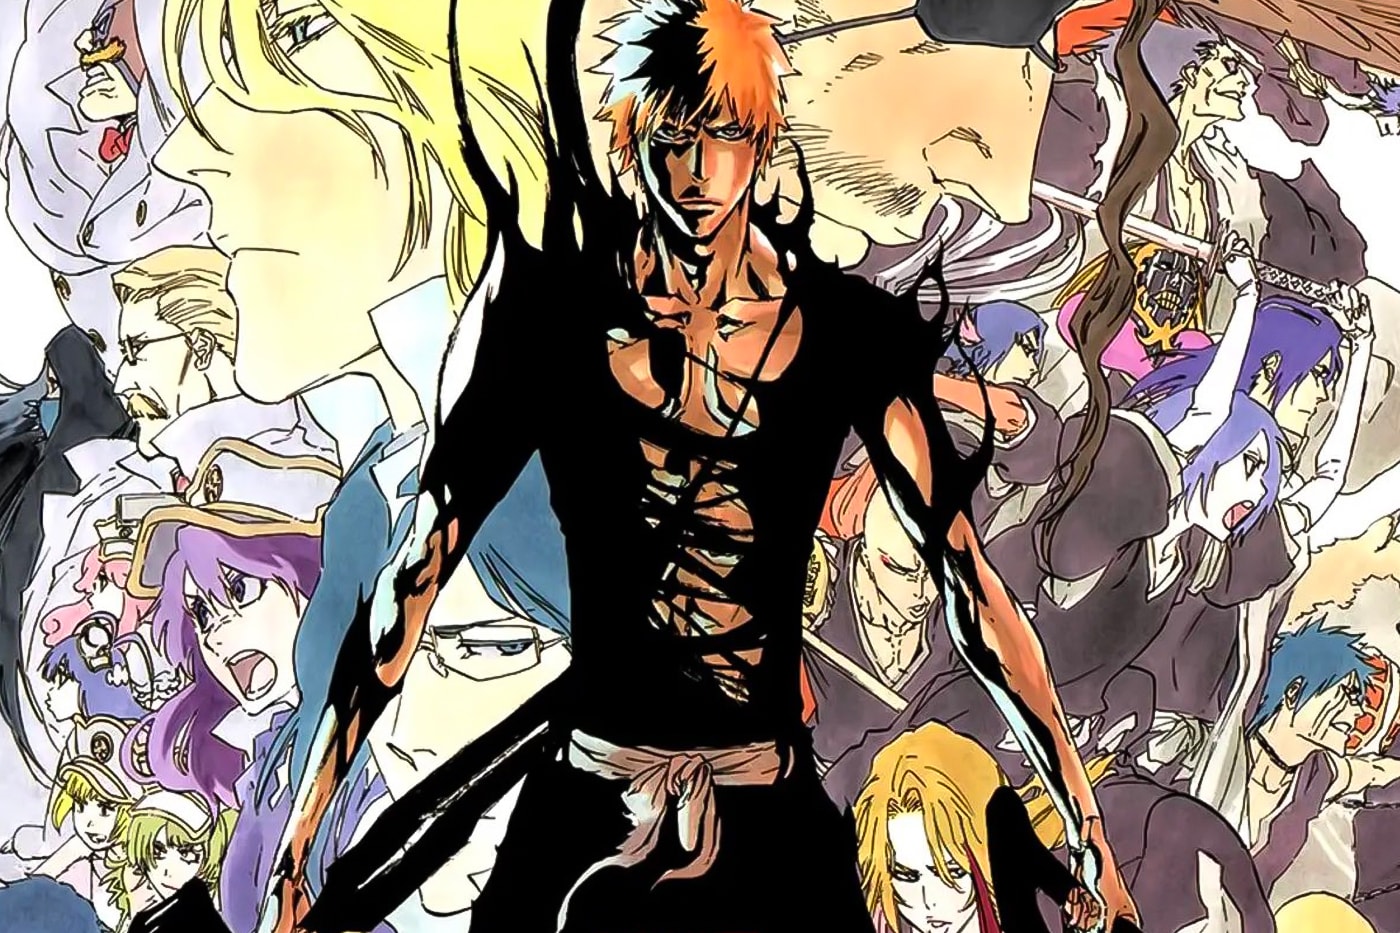 Could Bleach have a sequel with the son of Ichigo and Orihime as